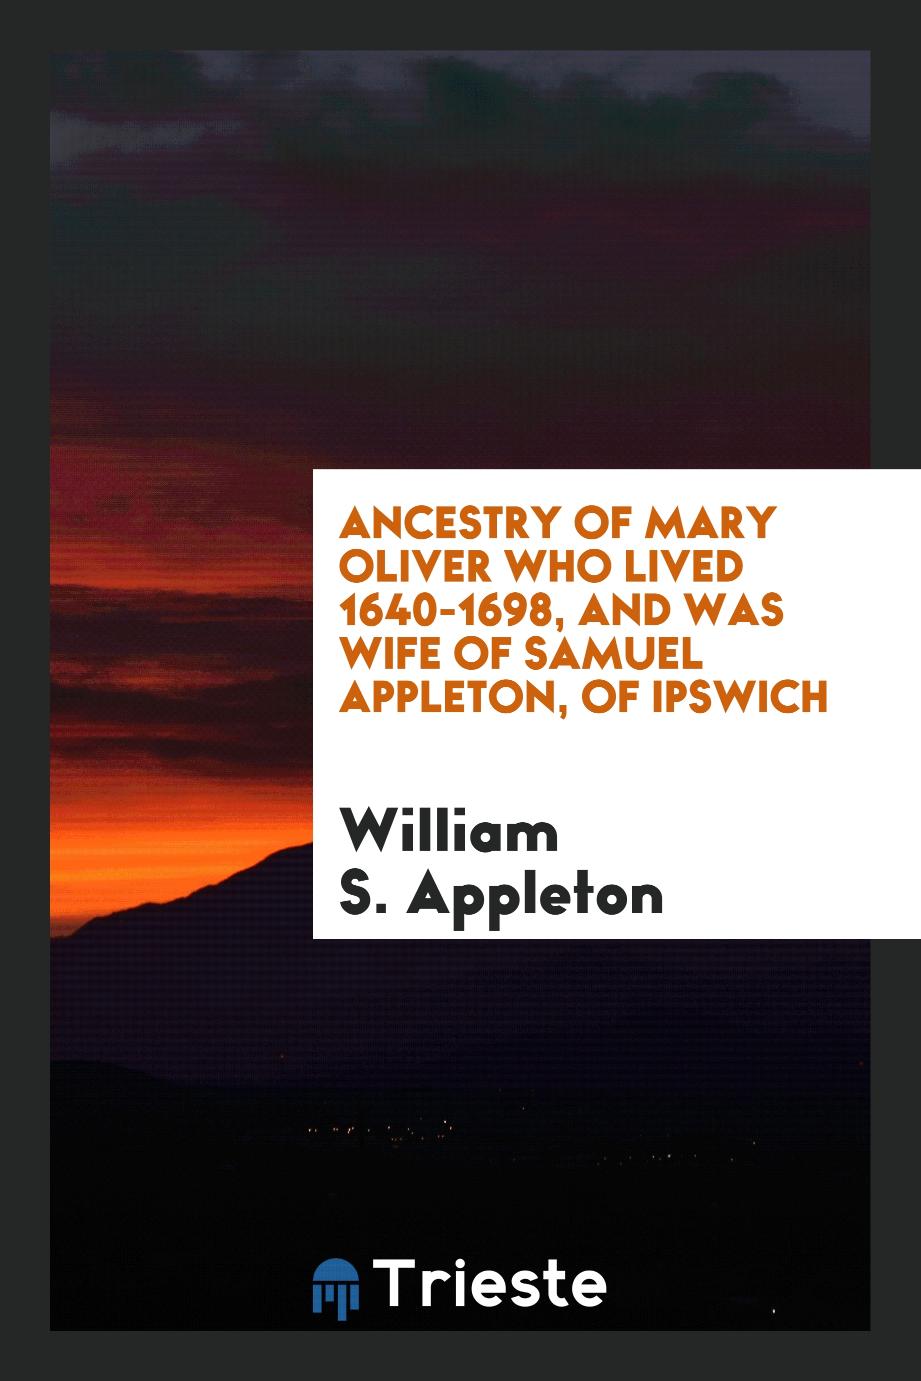 Ancestry of Mary Oliver who lived 1640-1698, and was wife of Samuel Appleton, of Ipswich